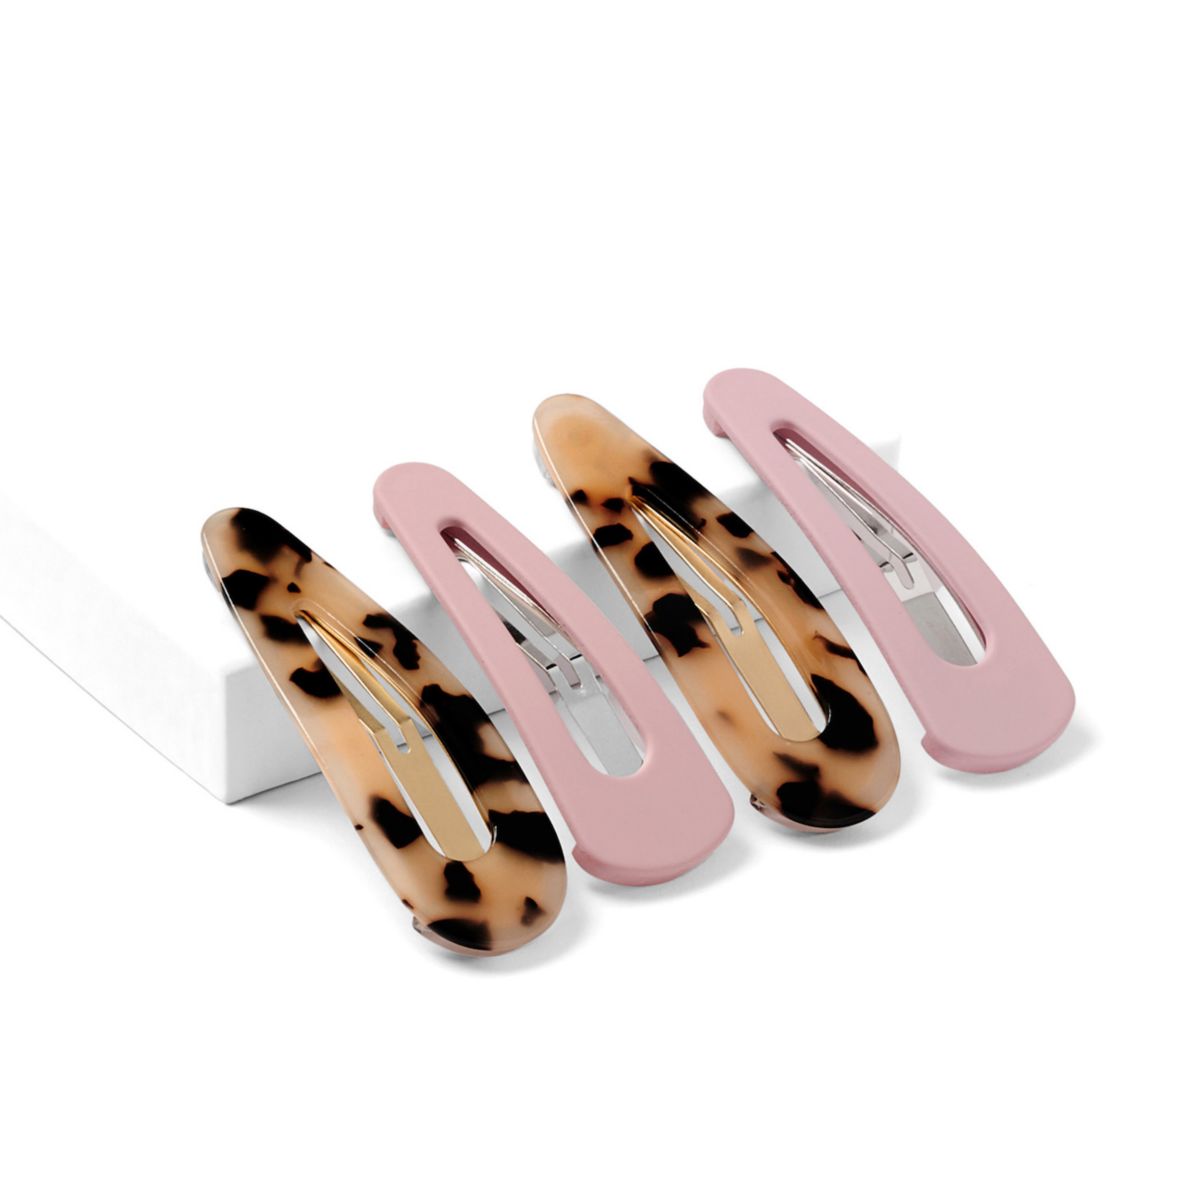 The Hair Edit Snap Triangle Clips Barrettes 4-piece Set The Hair Edit